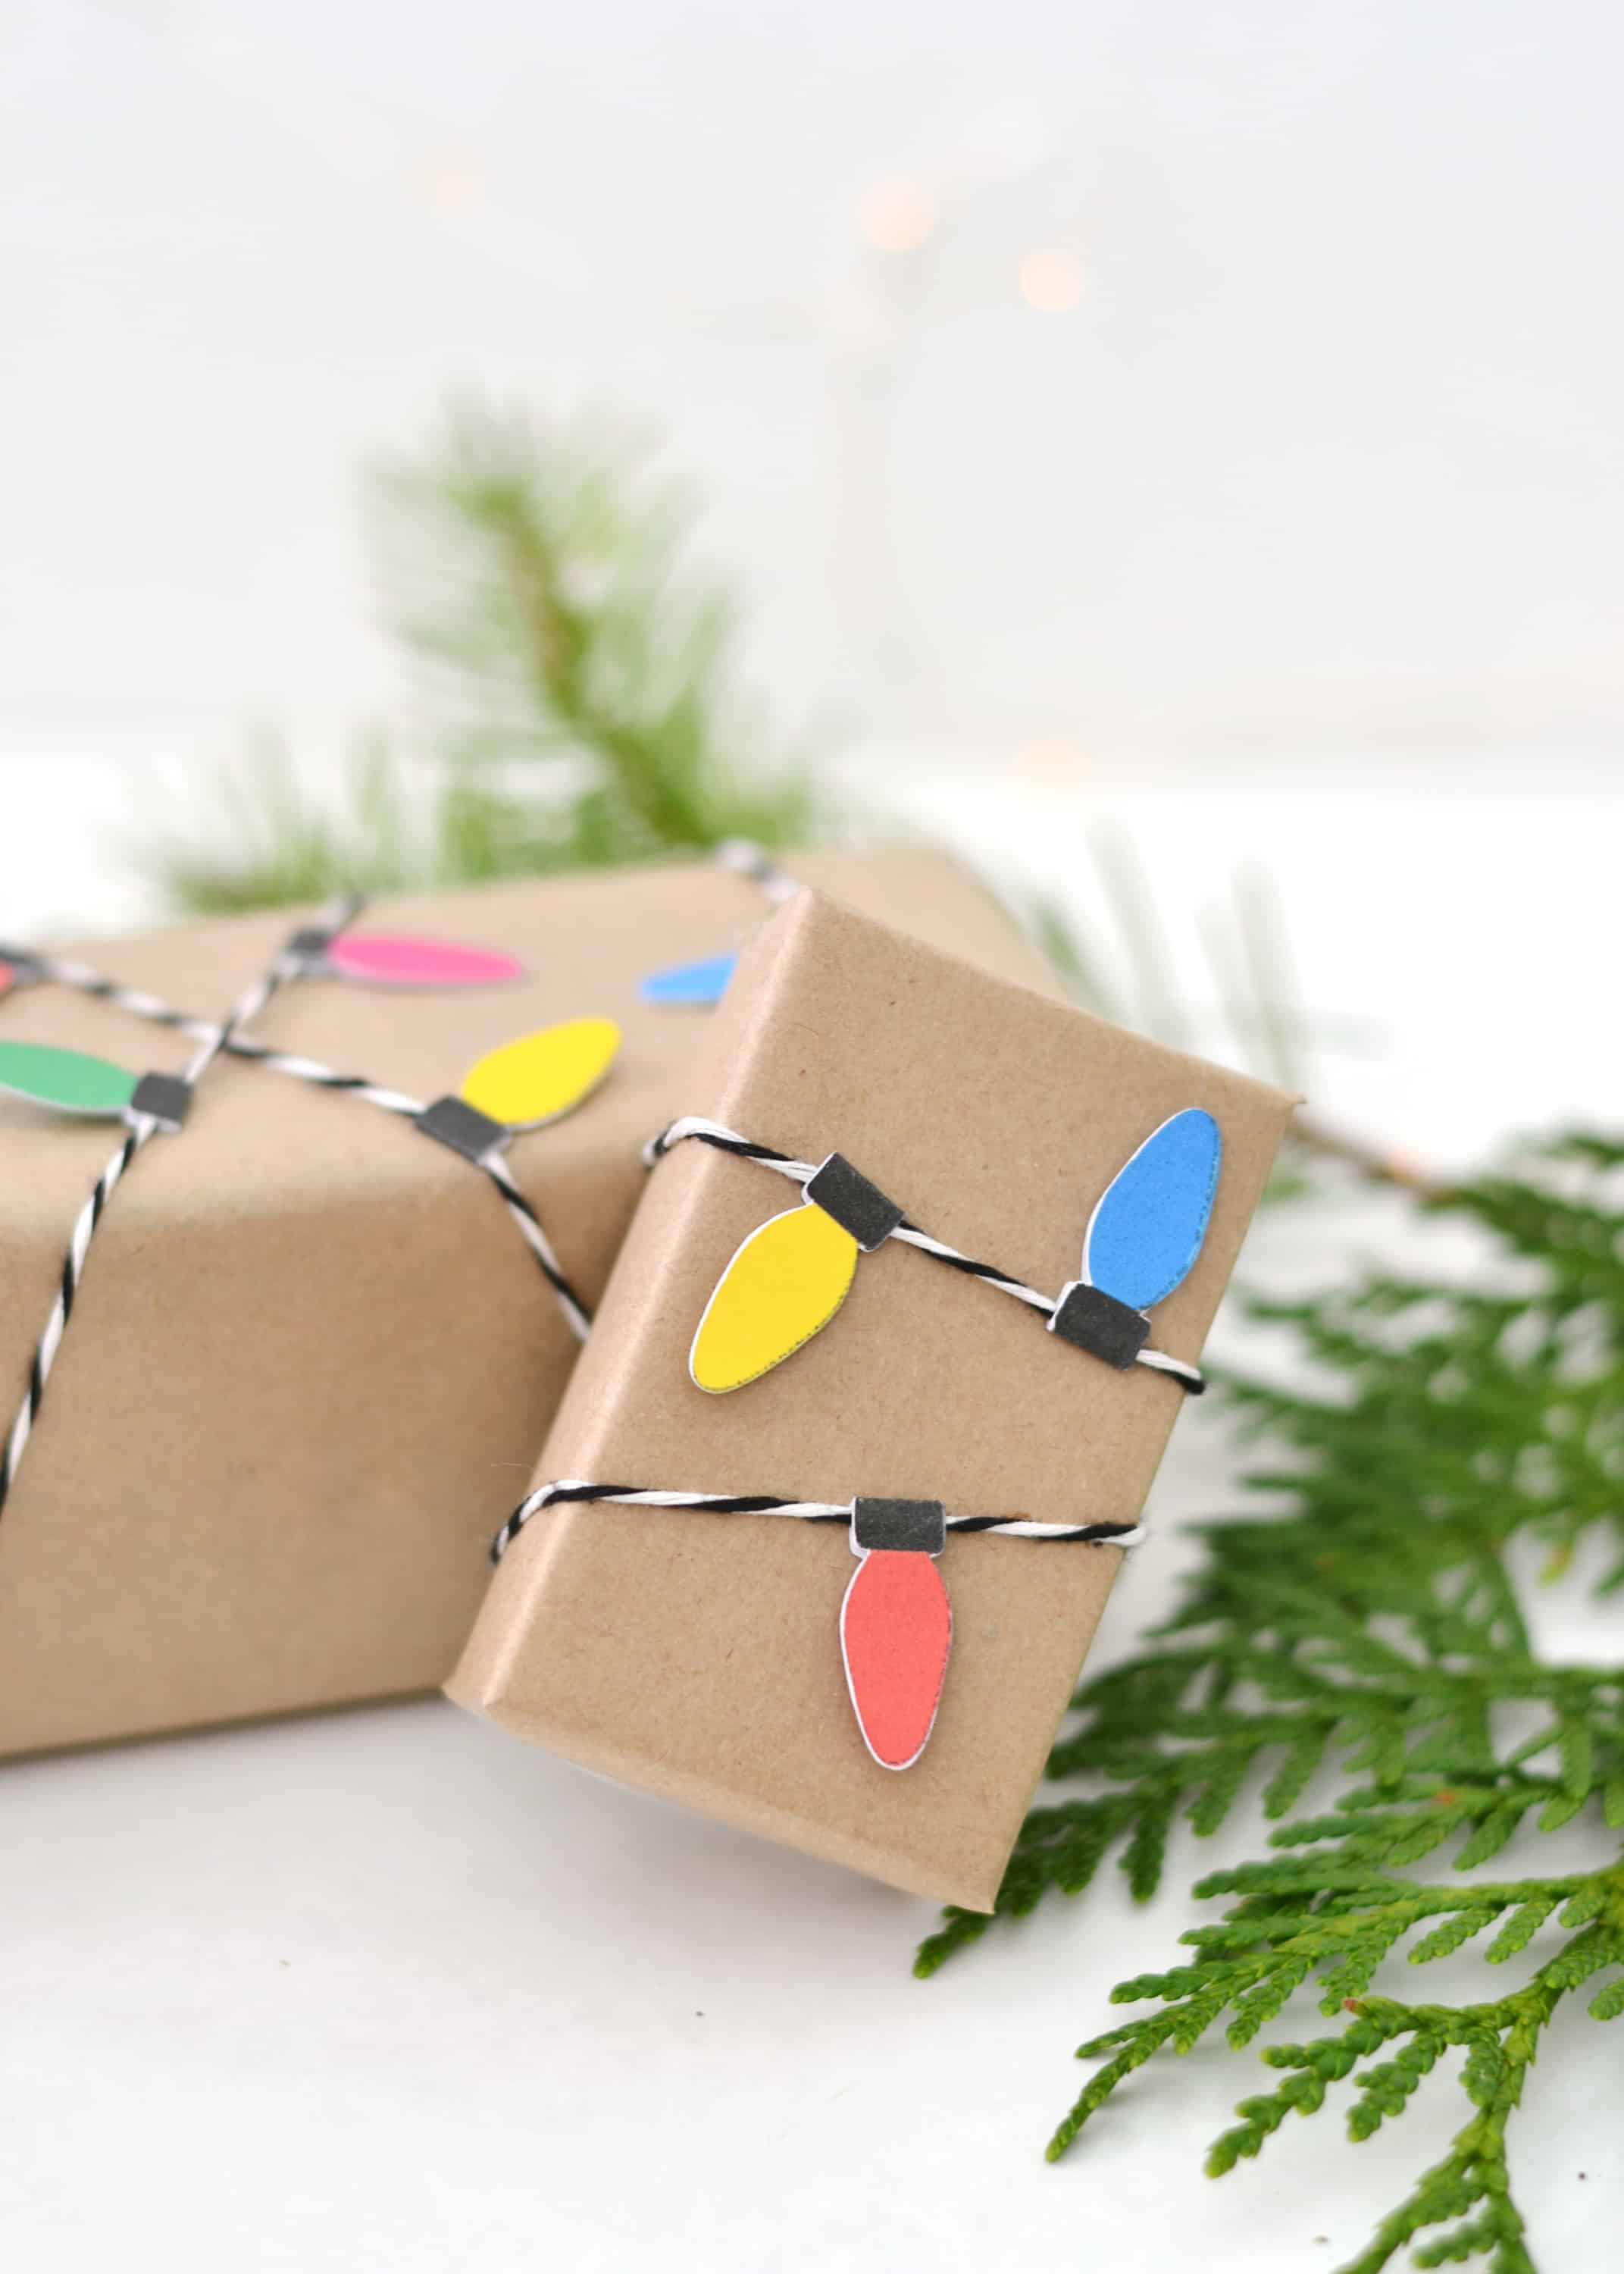 Christmas Wrapping Paper//Christmas Lights Wrapping Paper//Fun Holiday Wrap